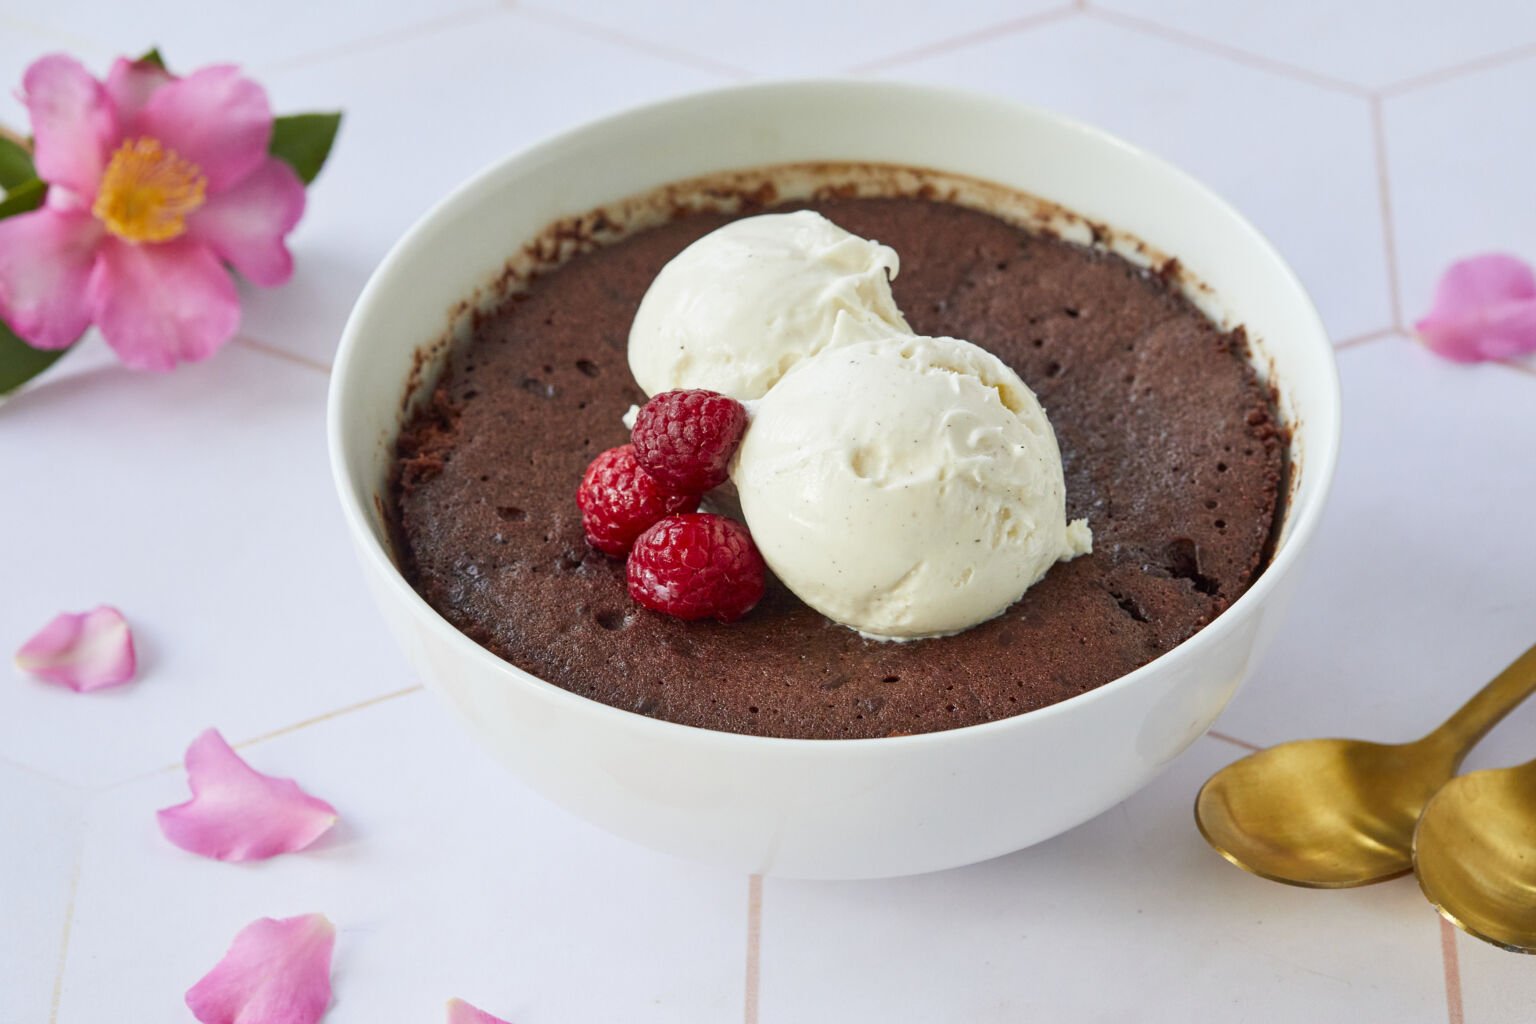 How to microwave lava cake